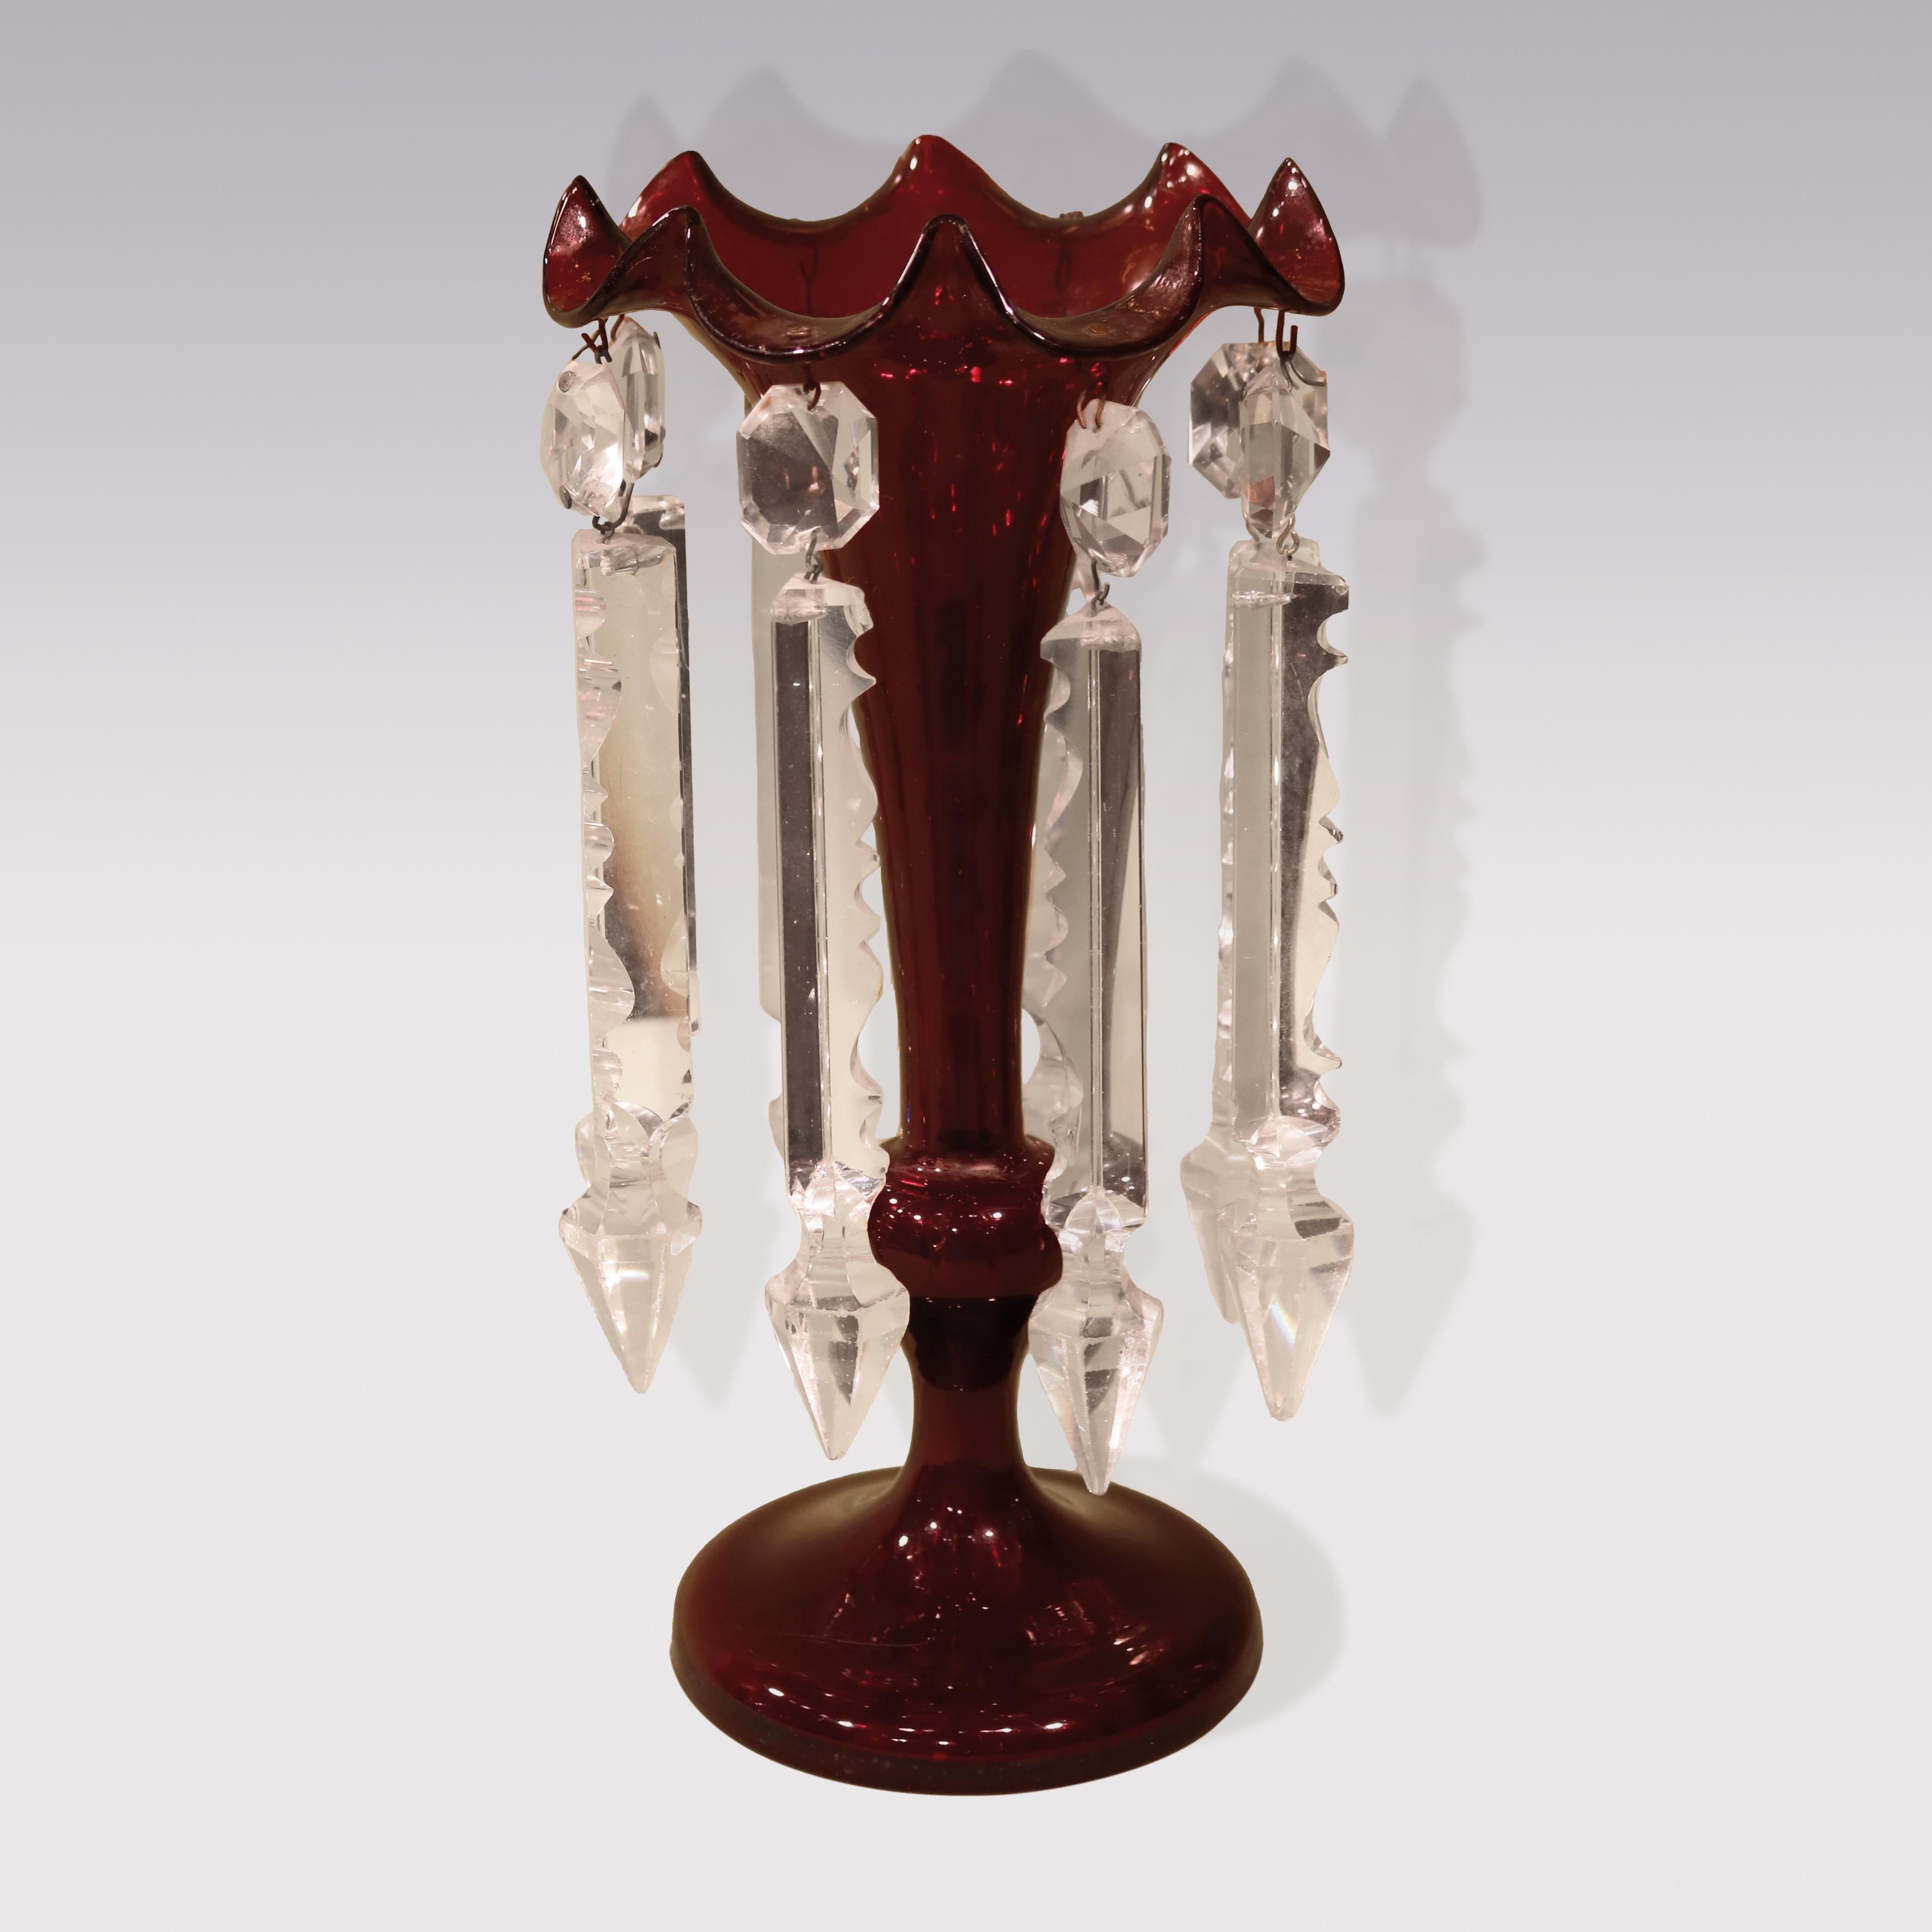 A pair of mid 19th century cranberry glass Vases, having scalloped tops holding cut-glass pendant drops raised on circular stems.